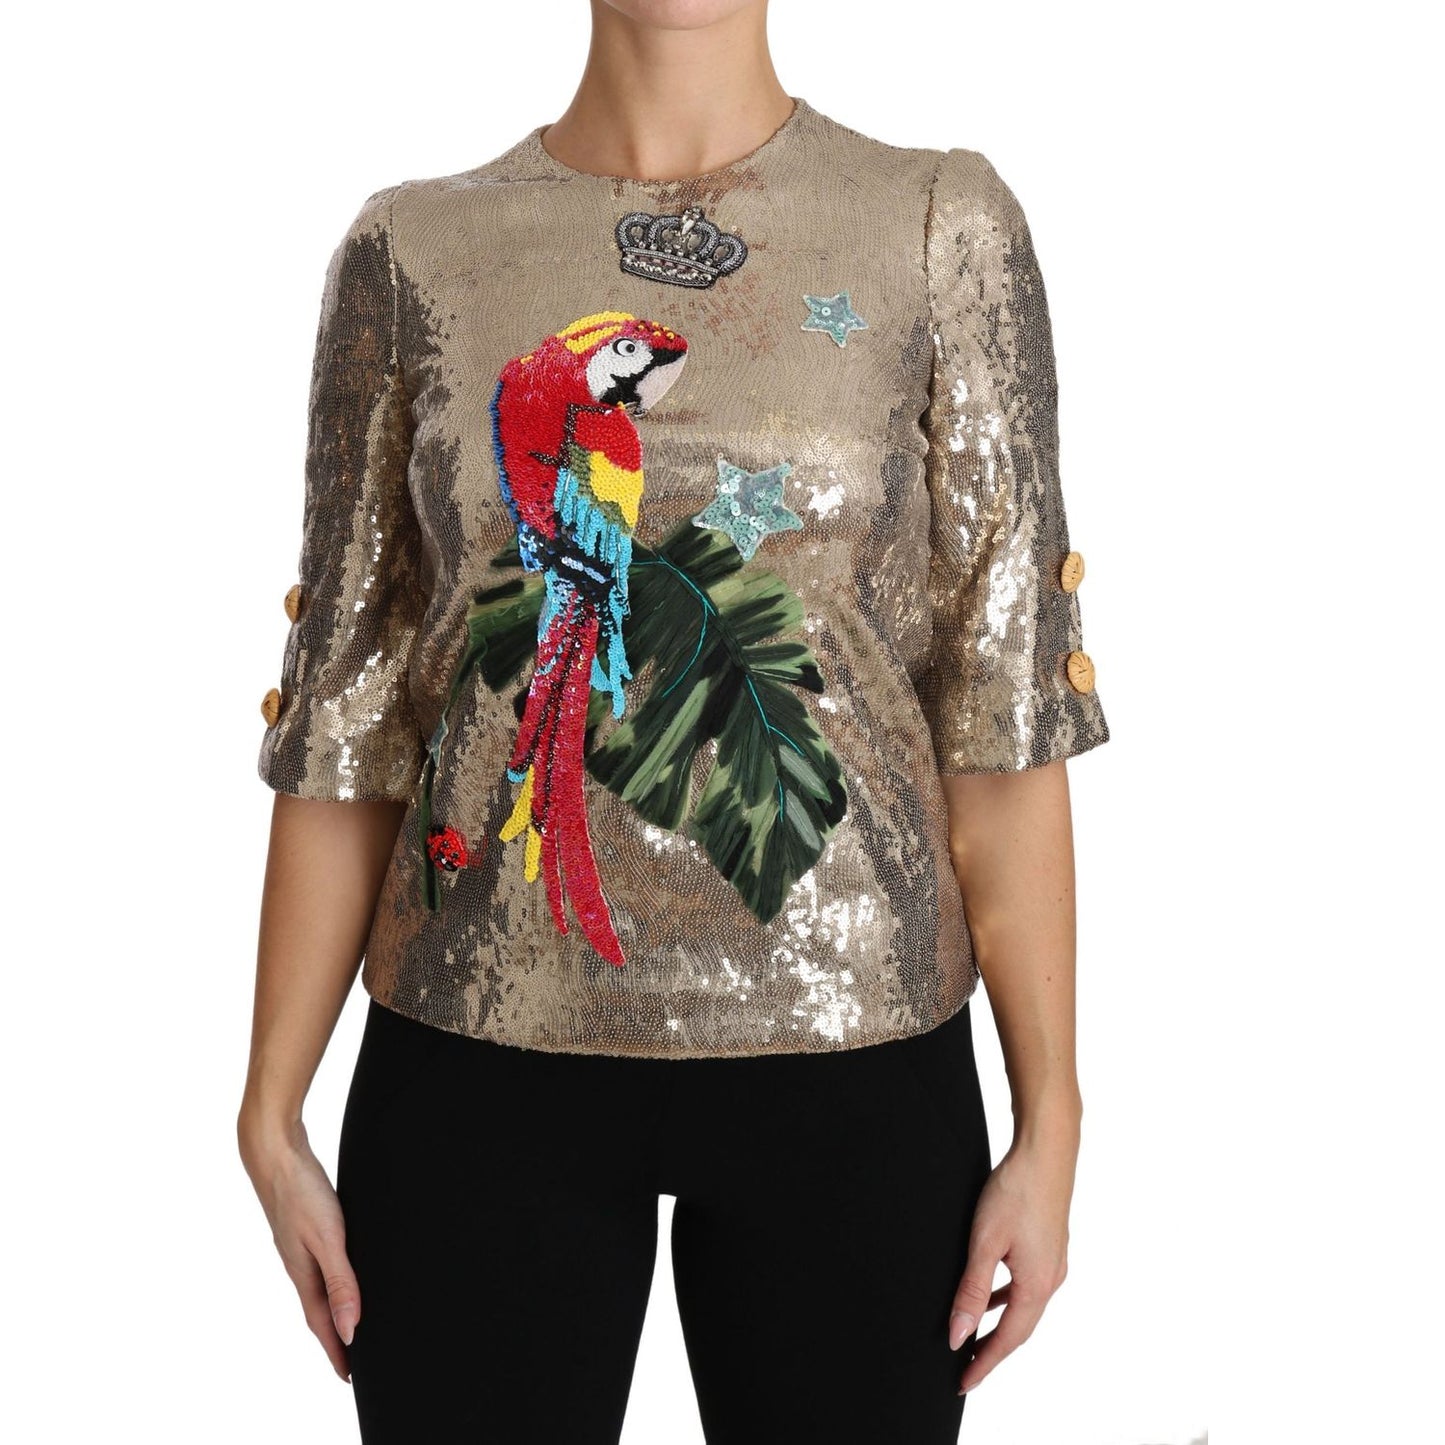 Dolce & Gabbana Gold Parrot Motif Crewneck Blouse with Crystals gold-sequined-parrot-crystal-blouse 654059-gold-sequined-parrot-crystal-blouse.jpg